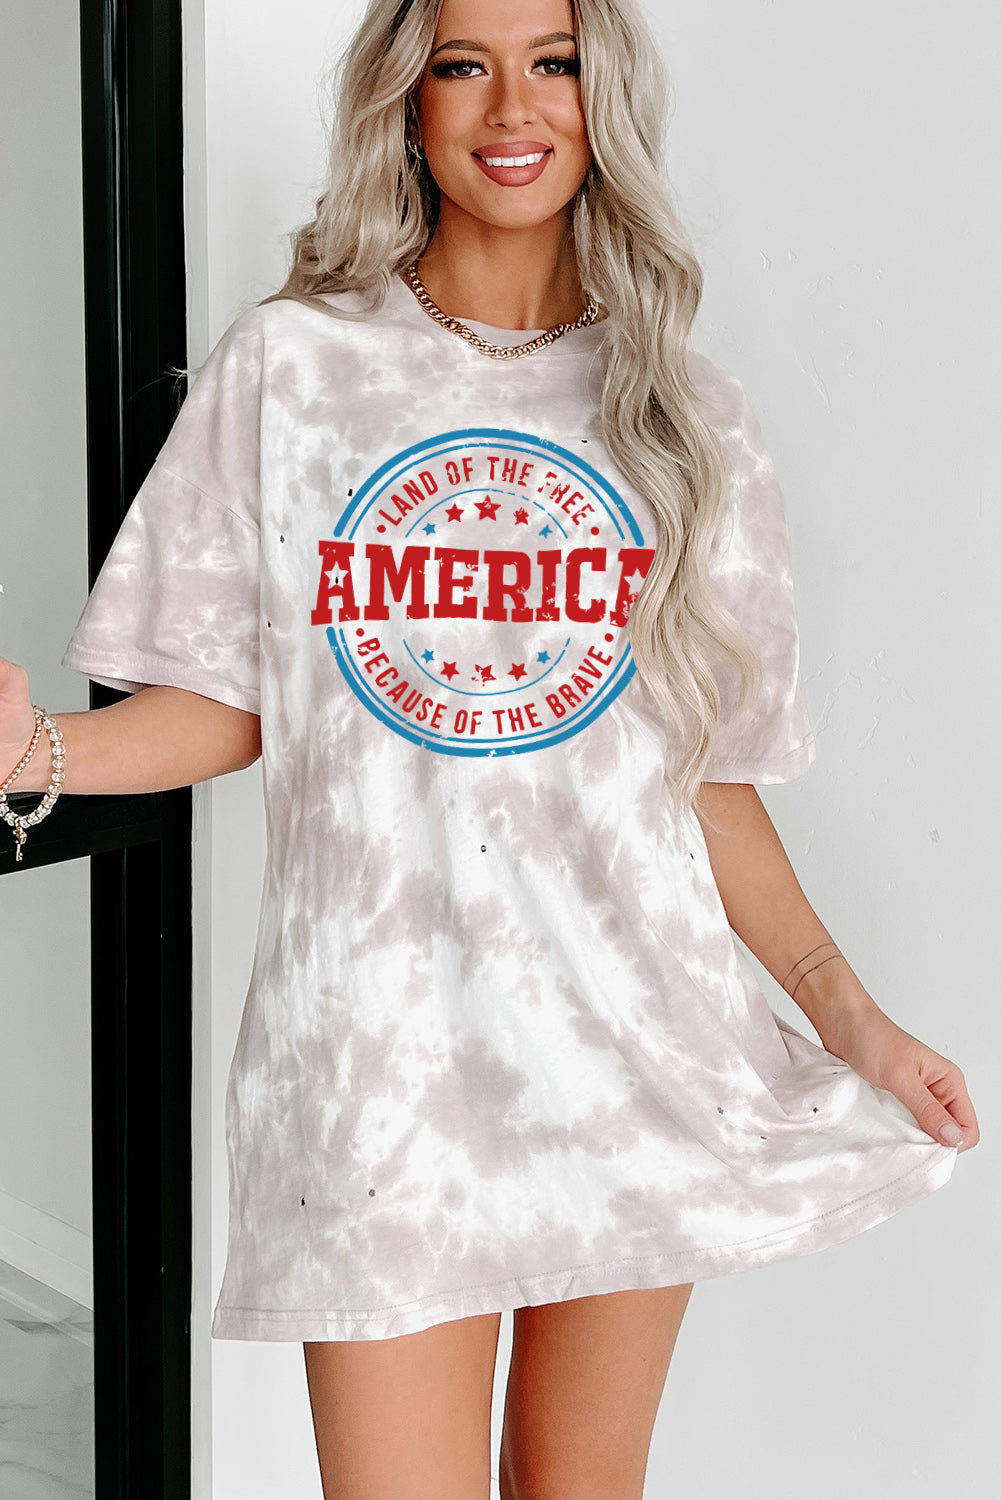 LC25221279-1-S, LC25221279-1-M, LC25221279-1-L, LC25221279-1-XL, White Women's Summer Oversized Tie-dye America Graphic T-shirt Dress Tunic Tee Tops